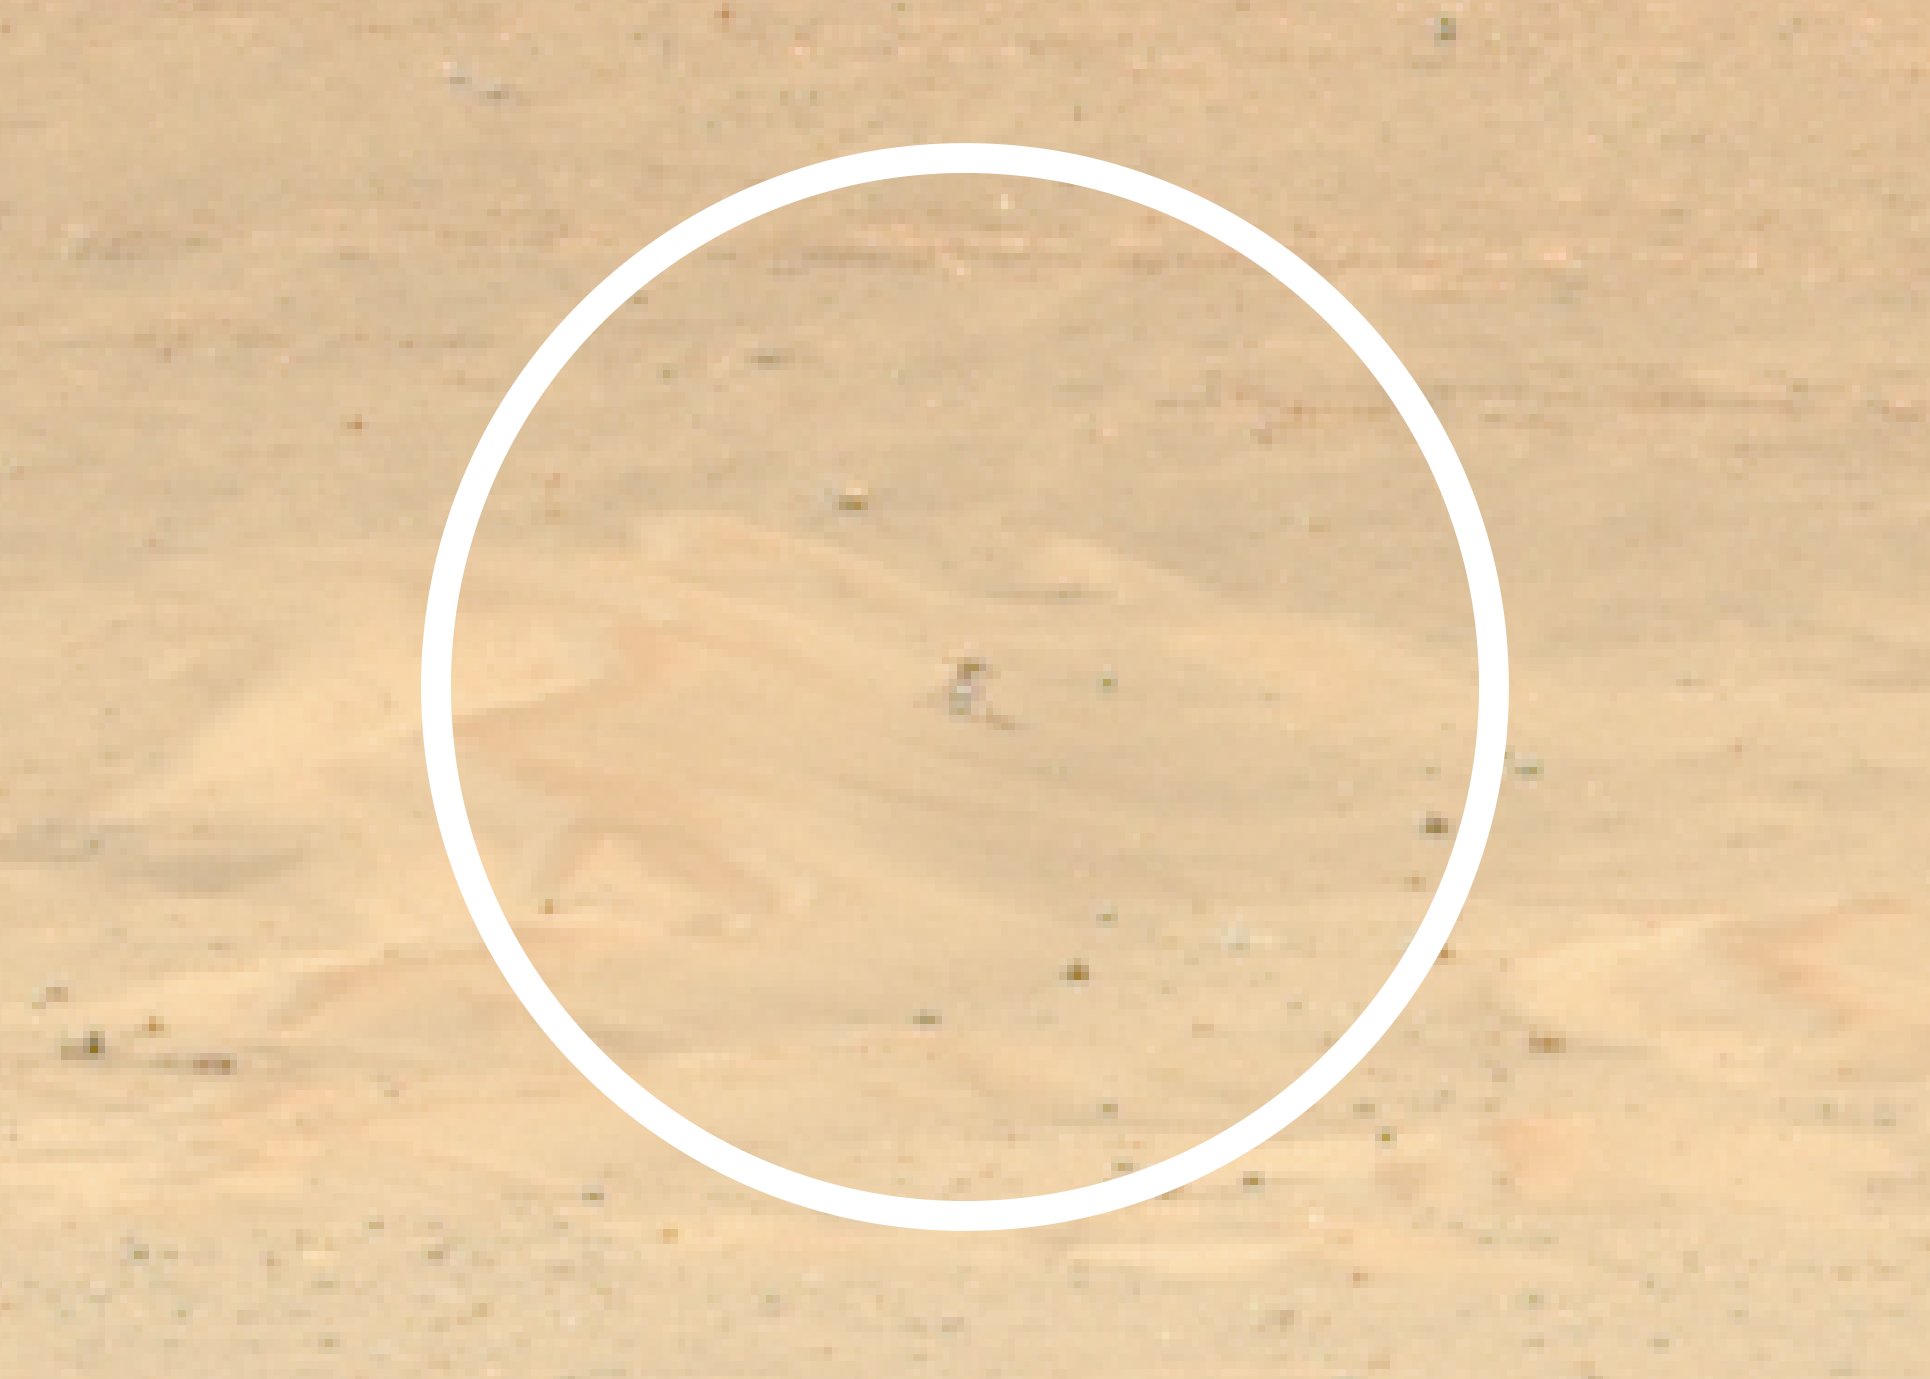 Zoomed-in view of a photo of NASA's Ingenuity Mars helicopter taken by the agency's Perseverance rover.  The rover team posted this image on Twitter on January 11, 2023.